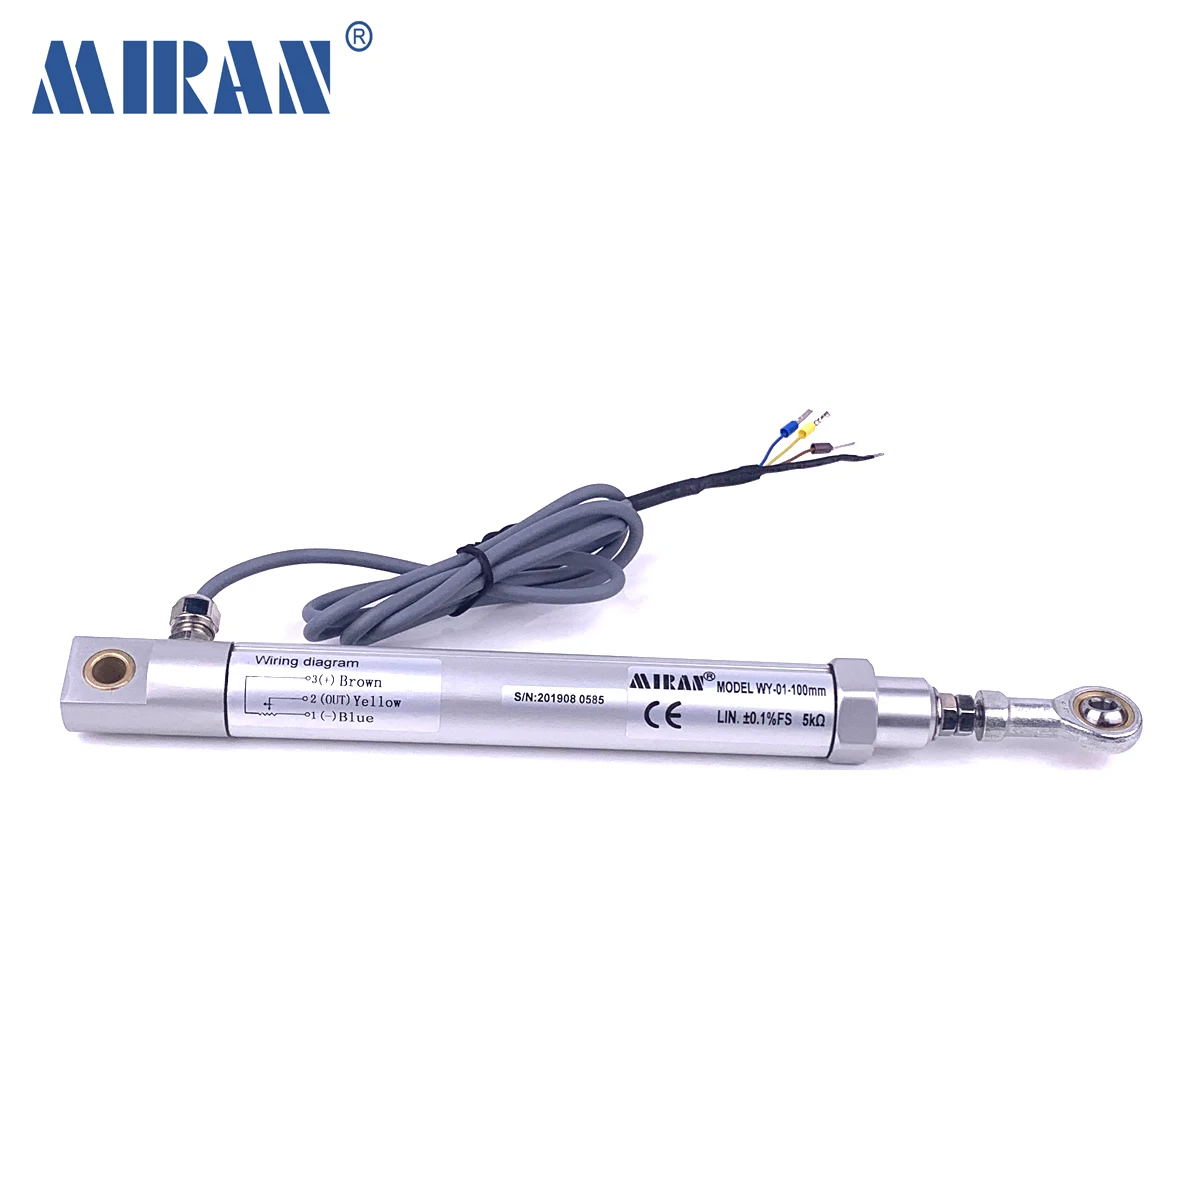 Miran WY-02 15-75mm High Sealing Screw Installation Miniature Pull Rod Linear Position Sensor/Scale for Cement Equipment